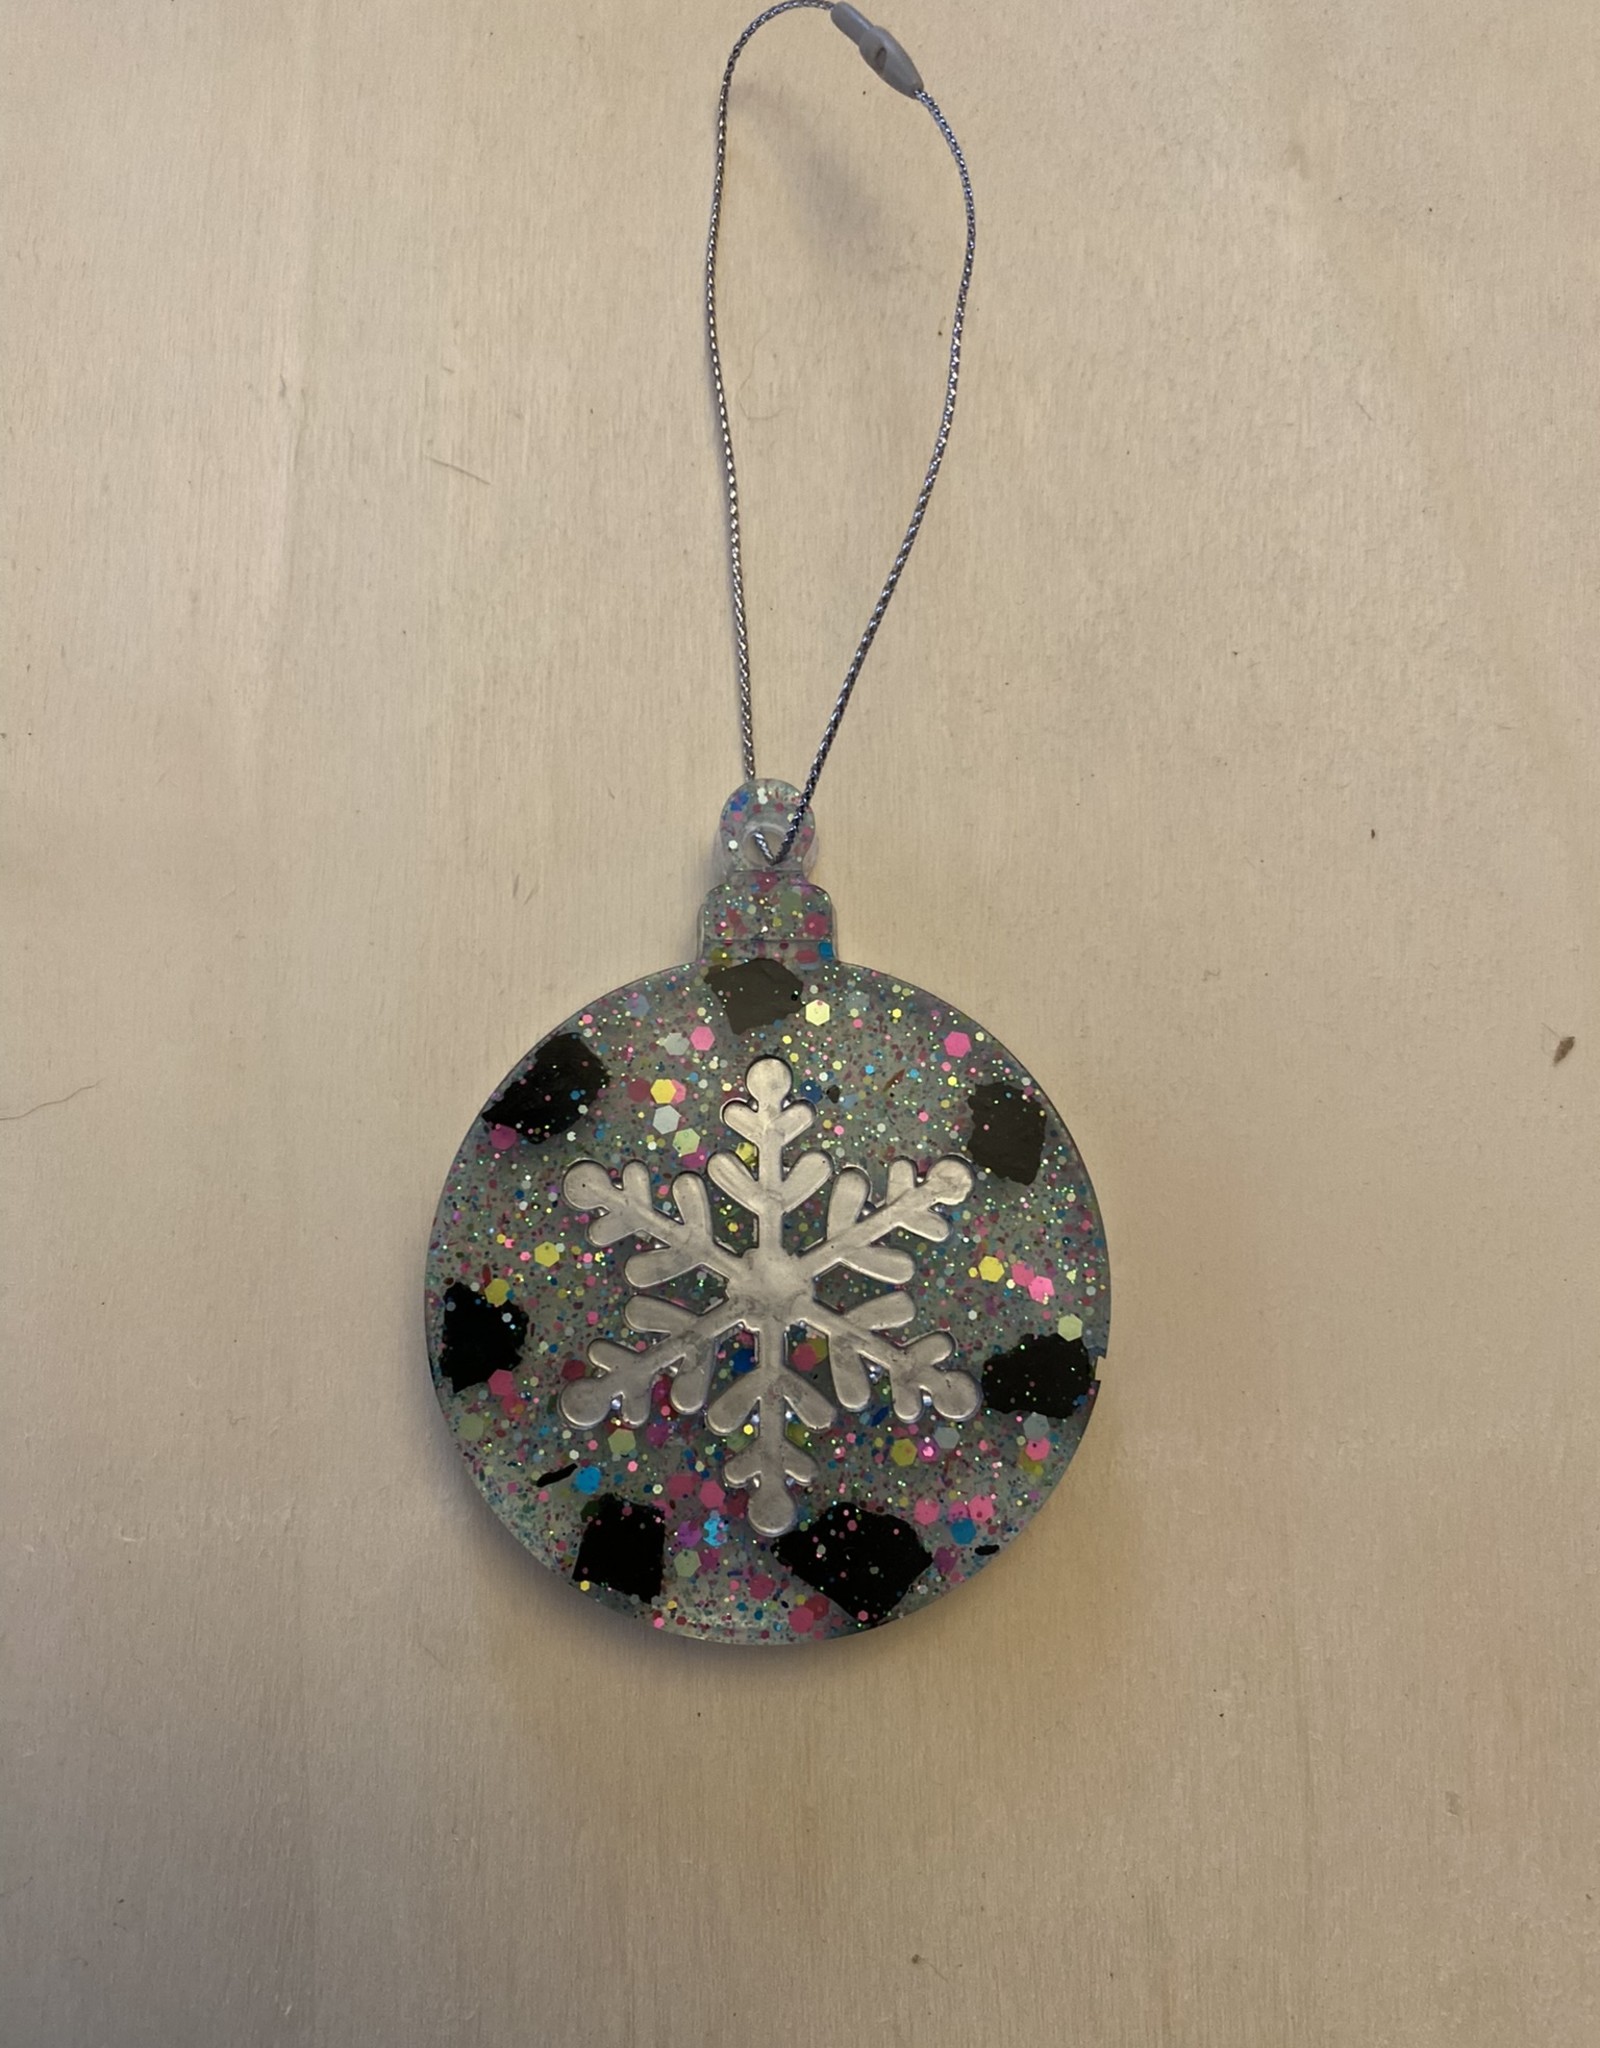 Lucas' Passion for Fashion Handmade Clear with Glitter Round Christmas Ornament w/ Coal Snowflake